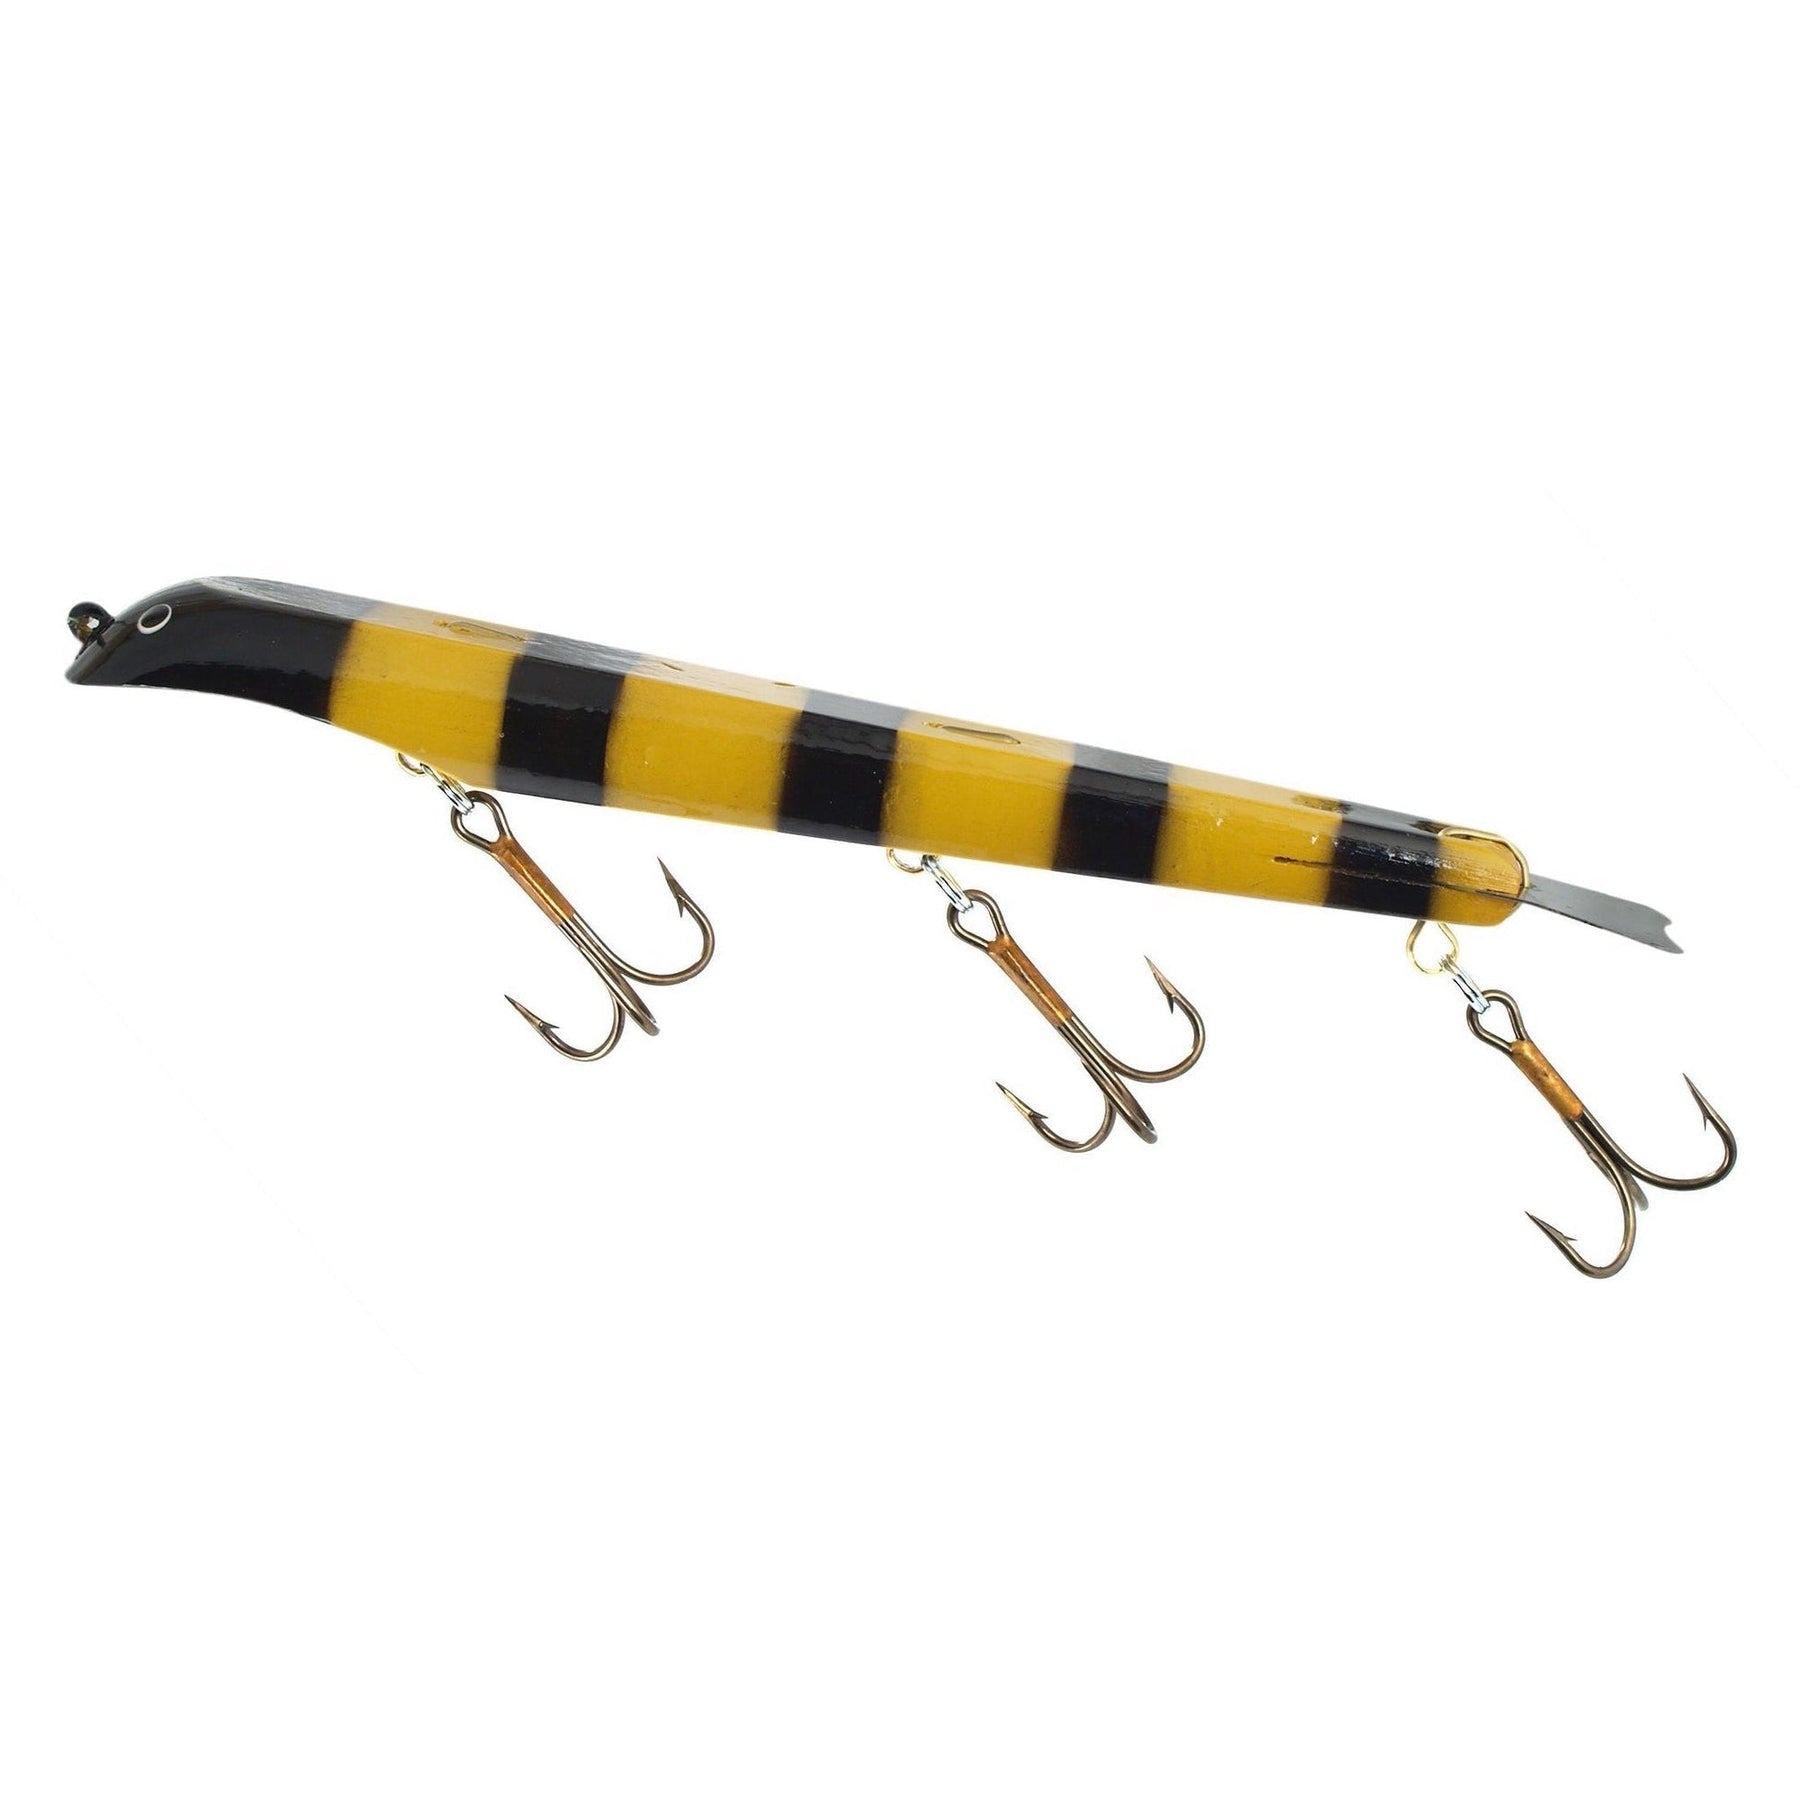 Suick Non-Weighted Magnum Thriller 12 Dive & Rise Bait | Musky lures Perch